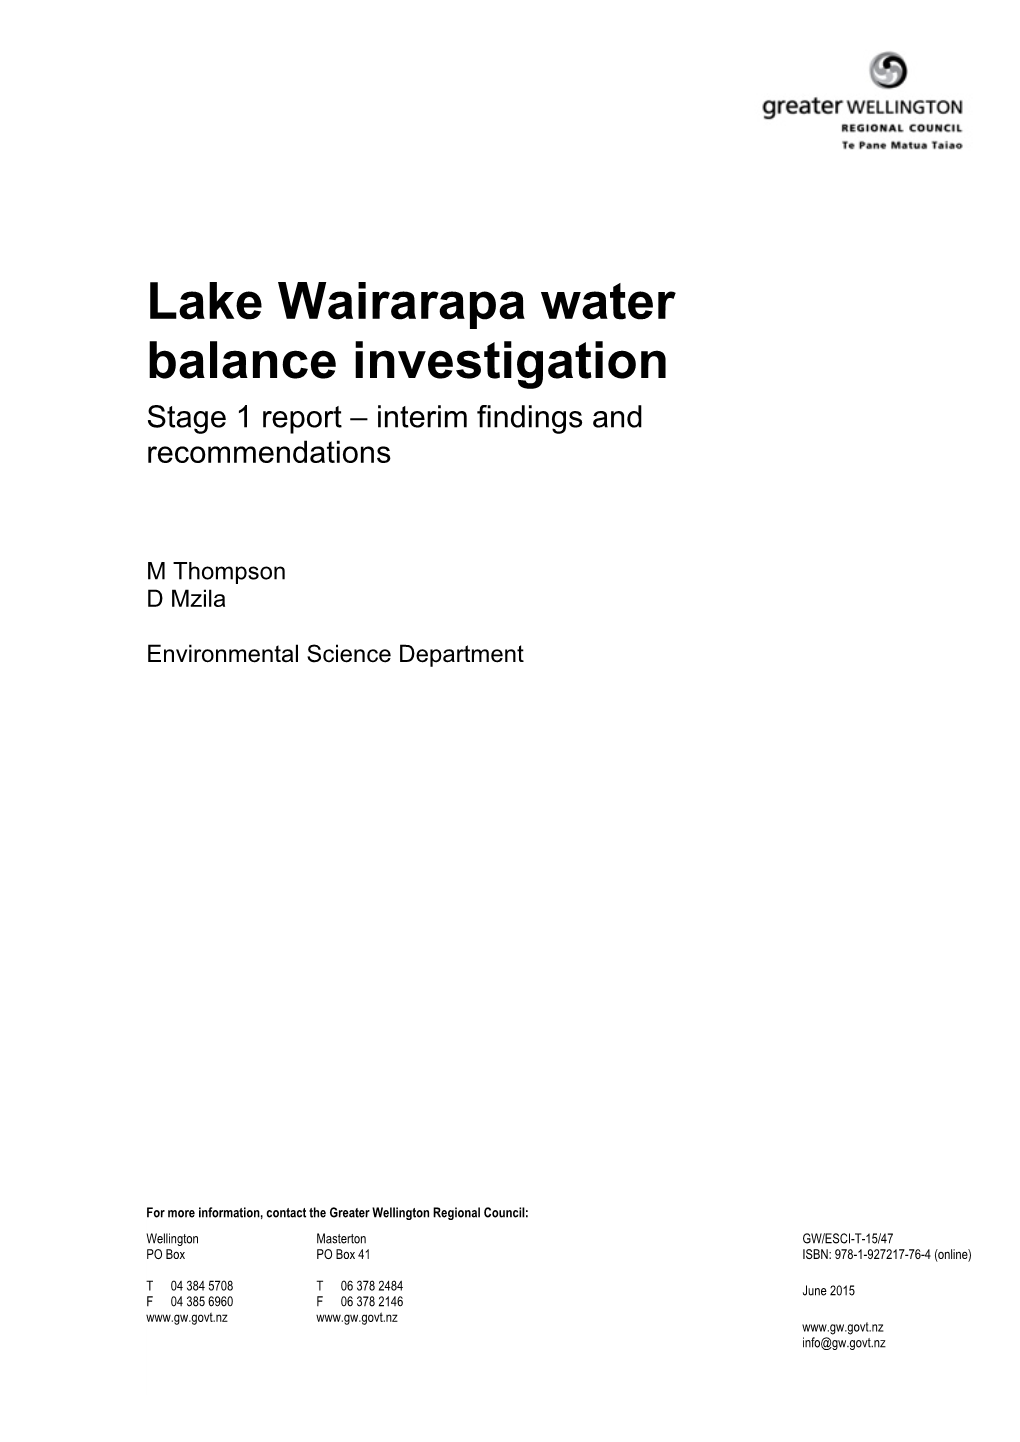 Lake Wairarapa Water Balance Investigation Stage 1 Report – Interim Findings and Recommendations